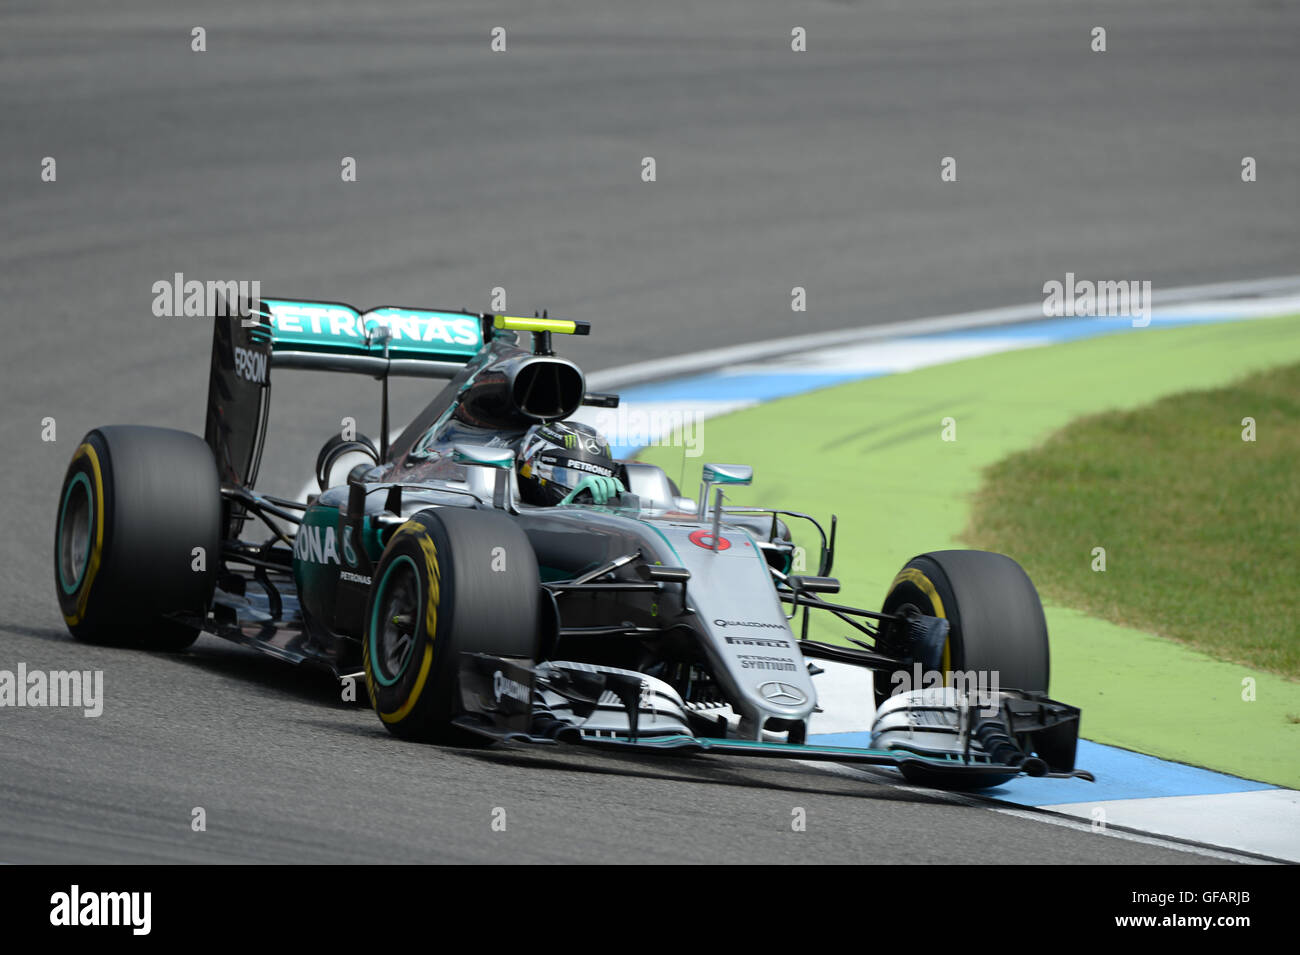 Hockenheim, Germany. 30th July, 2016. German Formula 1 racer Nico Rosberg from Mercedes AMG Petronas drives during the qualifier on the Hockenheimring in Hockenheim, Germany, 30 July 2016. The German Grand Prix takes place on 31 July 2016. Photo: WOLFRAM KASTL/dpa/Alamy Live News Stock Photo